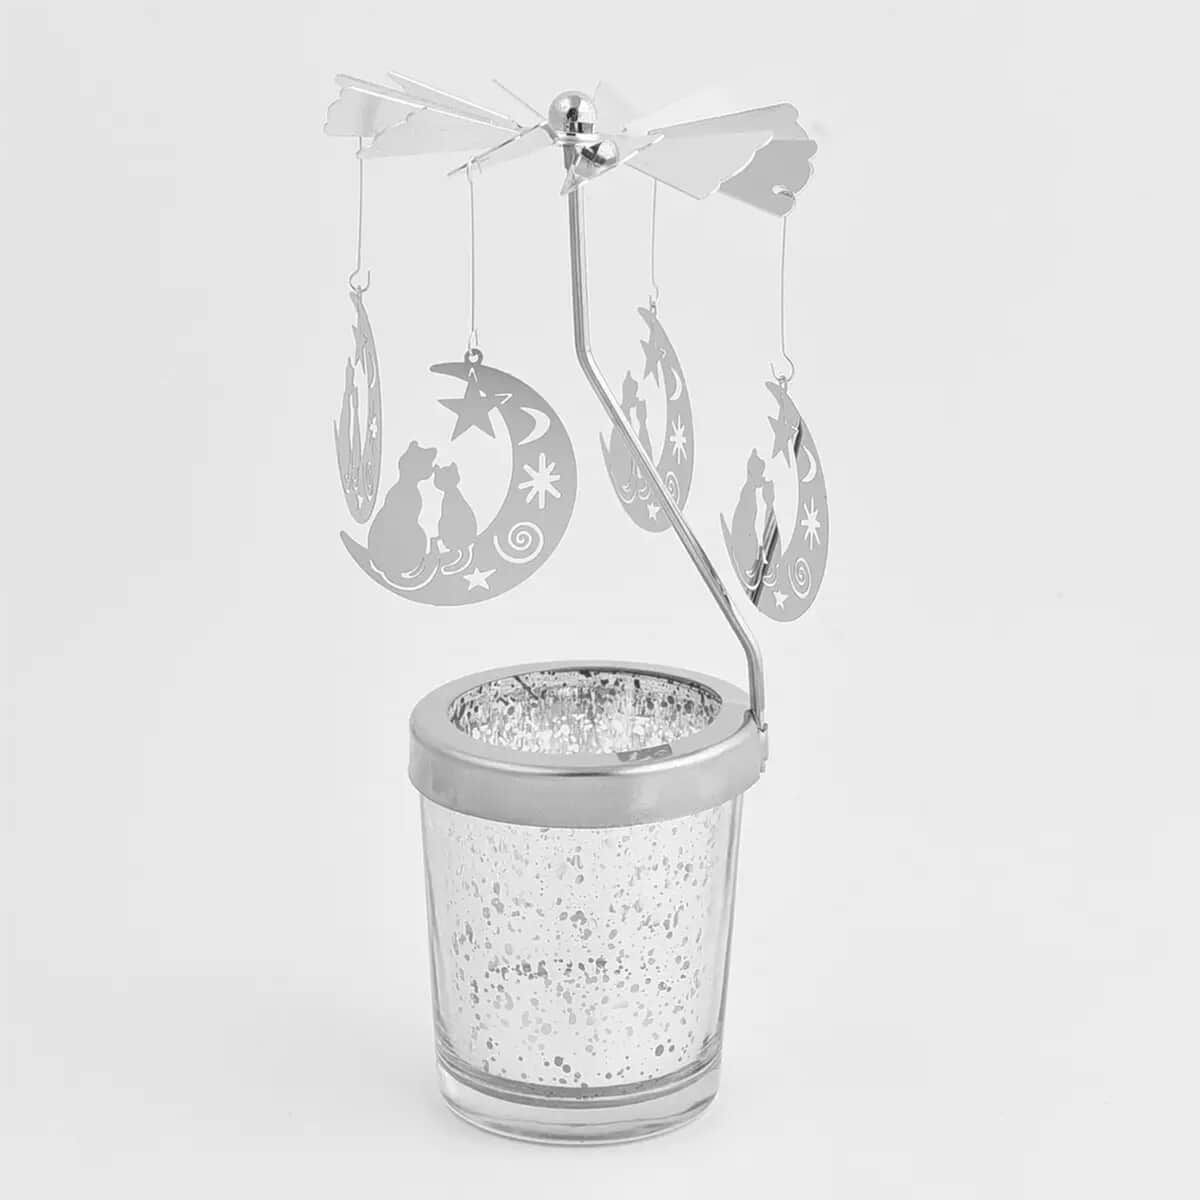 Moon-inspired Spinning Candle Holder with a Tea Light Candle - Silver (3.14"x3.14"x6.29") image number 0